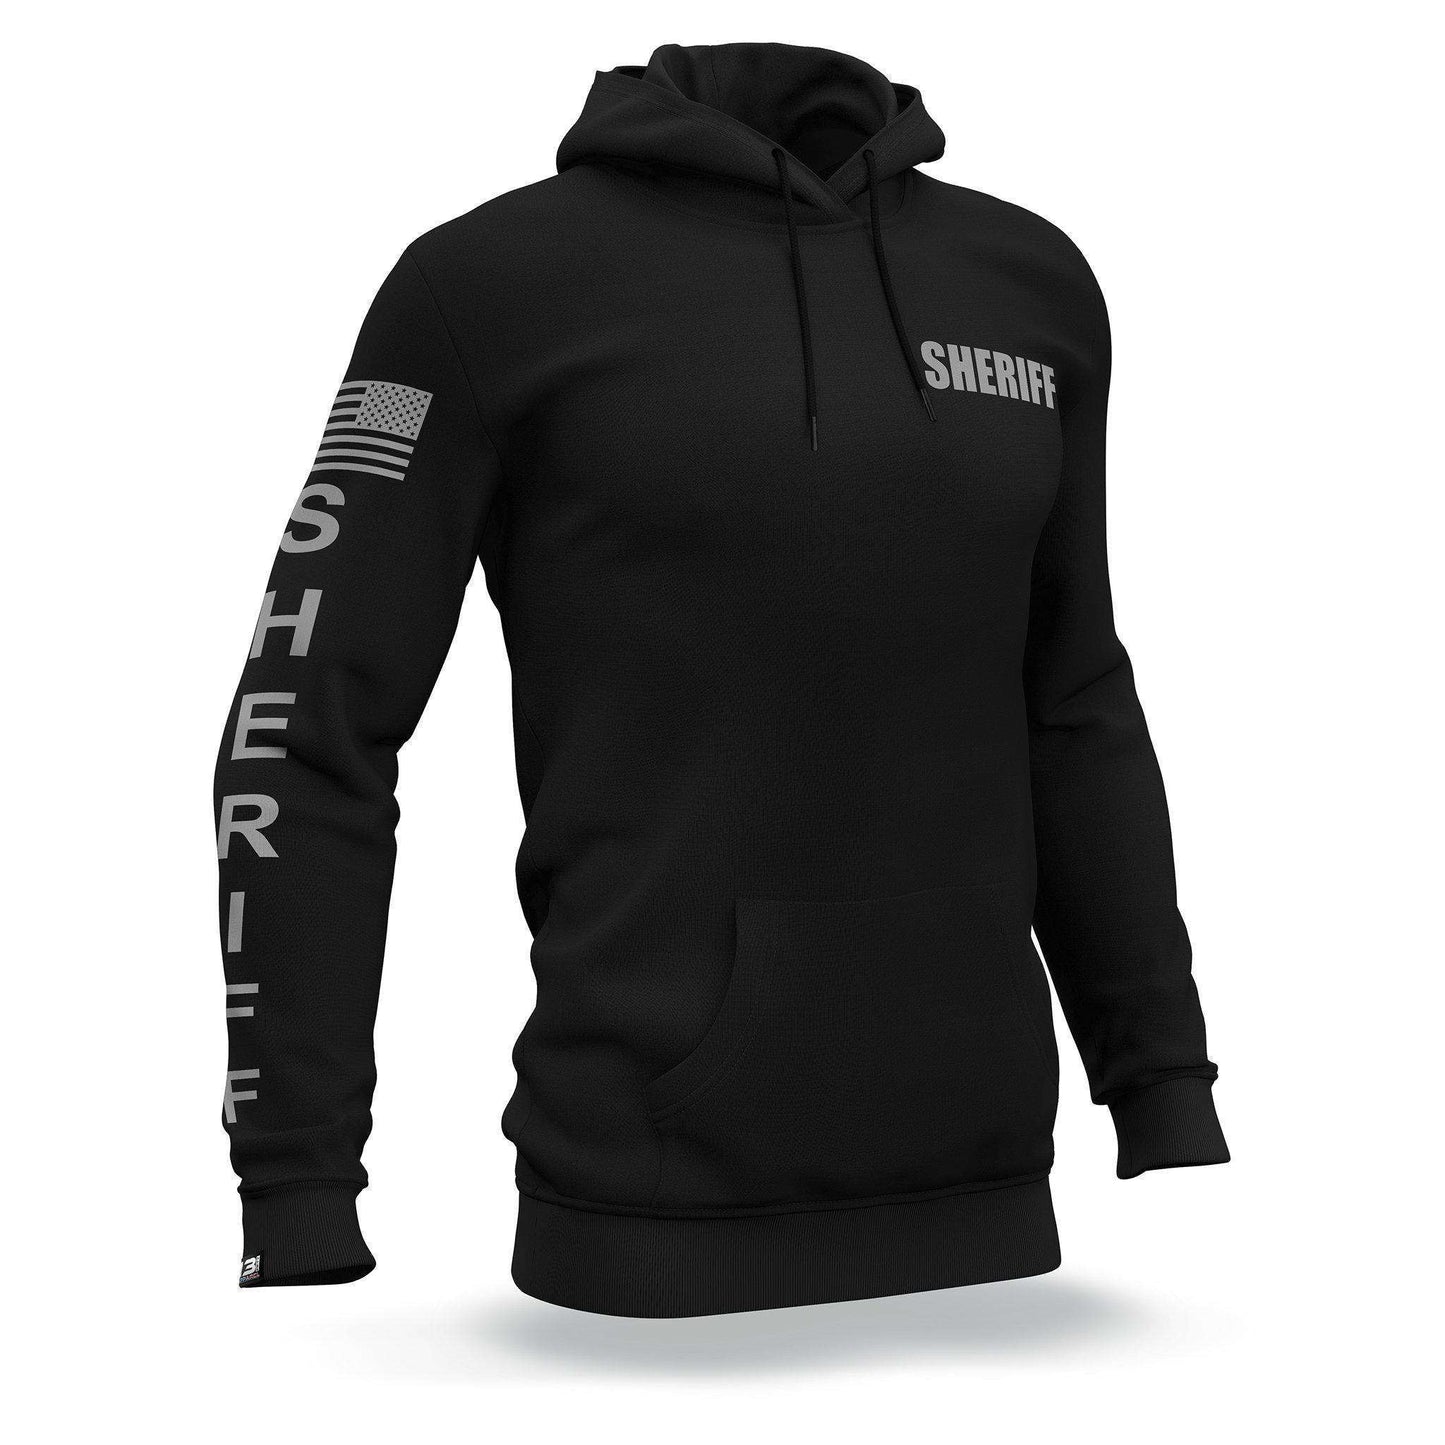 [SHERIFF] Performance Hoodie [BLK/GRY]-13 Fifty Apparel